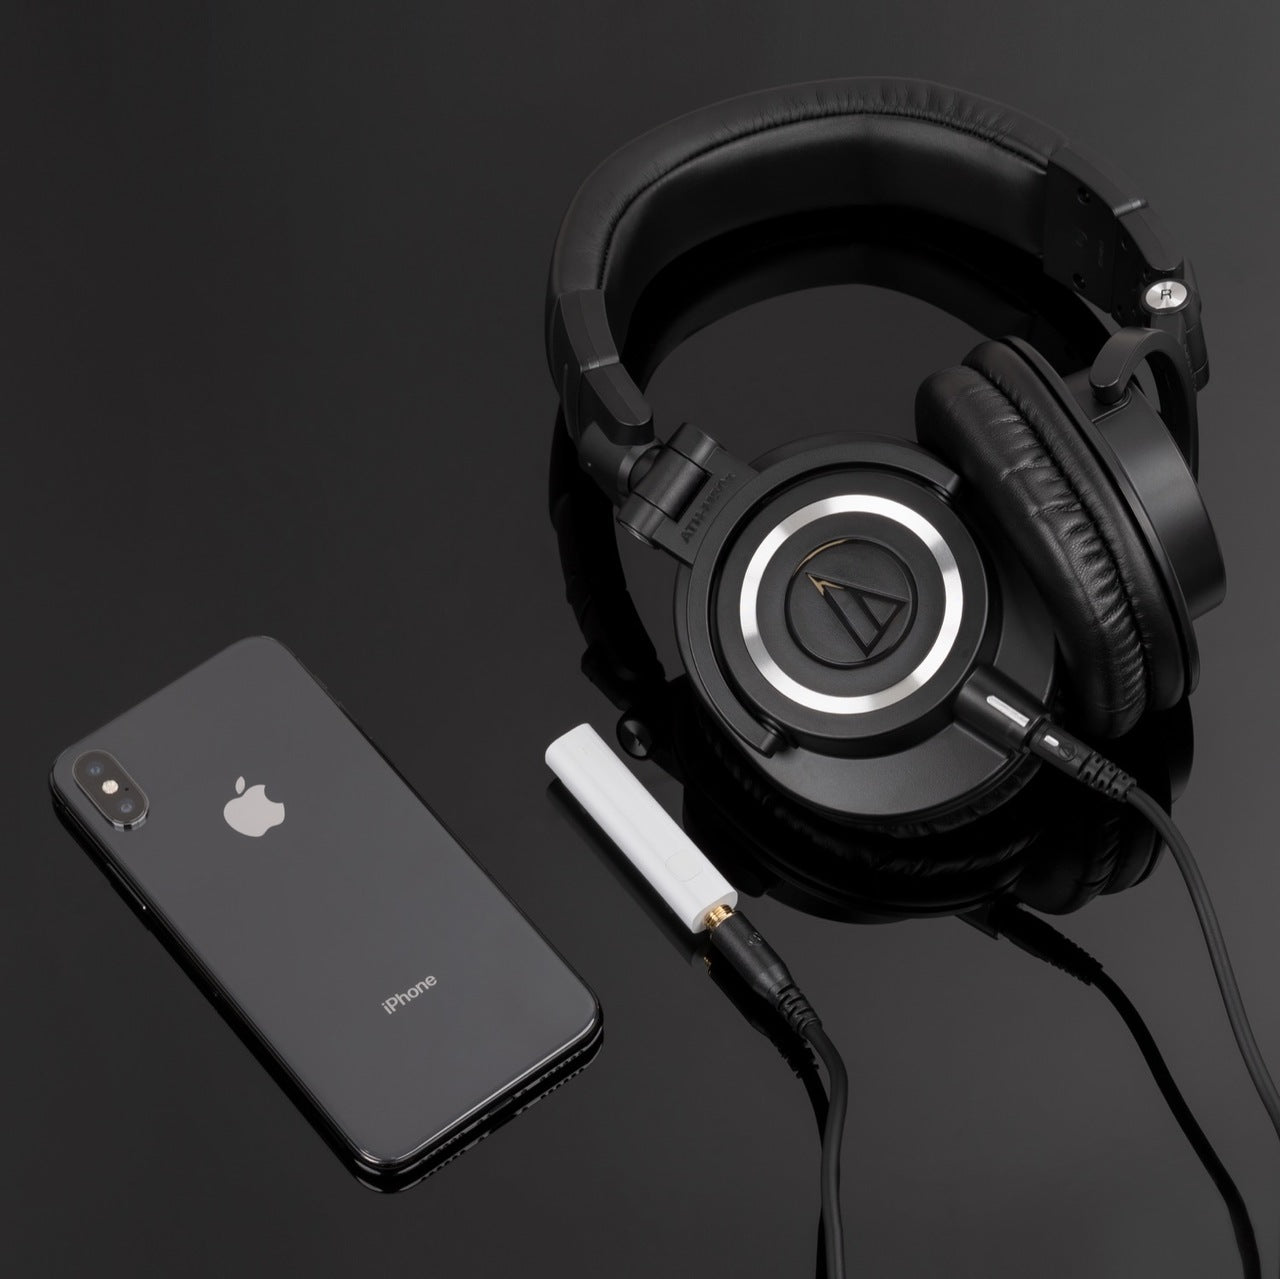 KonnecK
Bluetooth Audio Adapter
* Forget about being tethered by the length of your wired headphones cable
* It is extremely light, wonderfully small ((L x W x H): 5.90 x 1.35 x 1.30 cm / 2.32 x 0.53 x 0.51 inches) and easy to store in your pockets